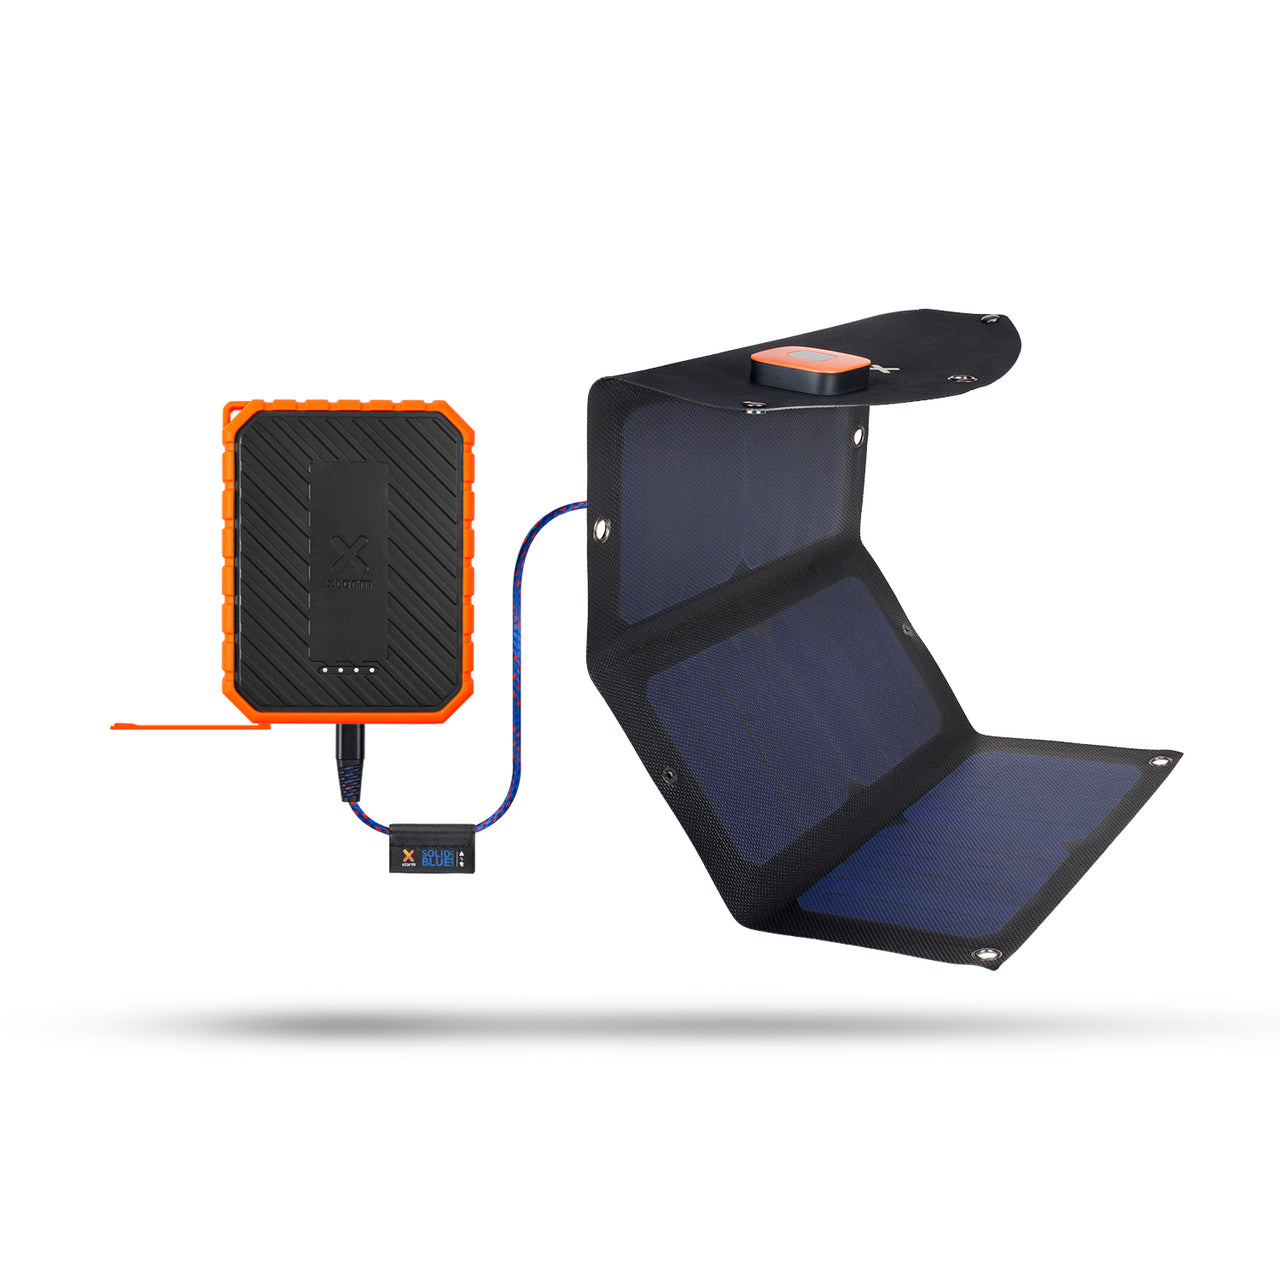 Xtreme Solar Panel SolarBooster - 21W - Xtorm NL